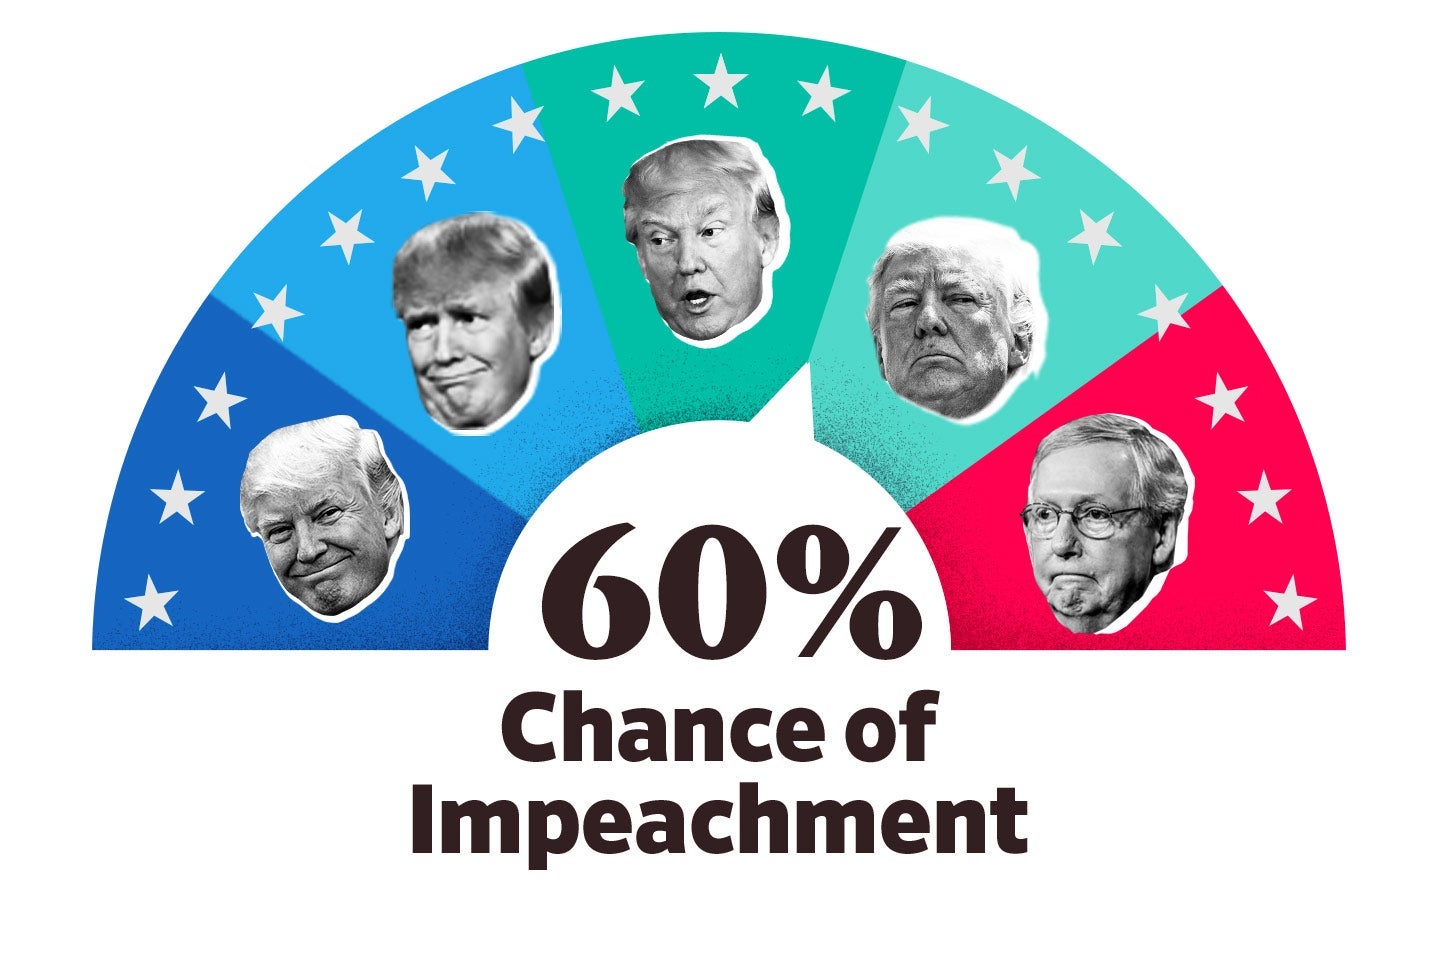 The Impeach-O-Meter shows a 60 percent likelihood of impeachment.